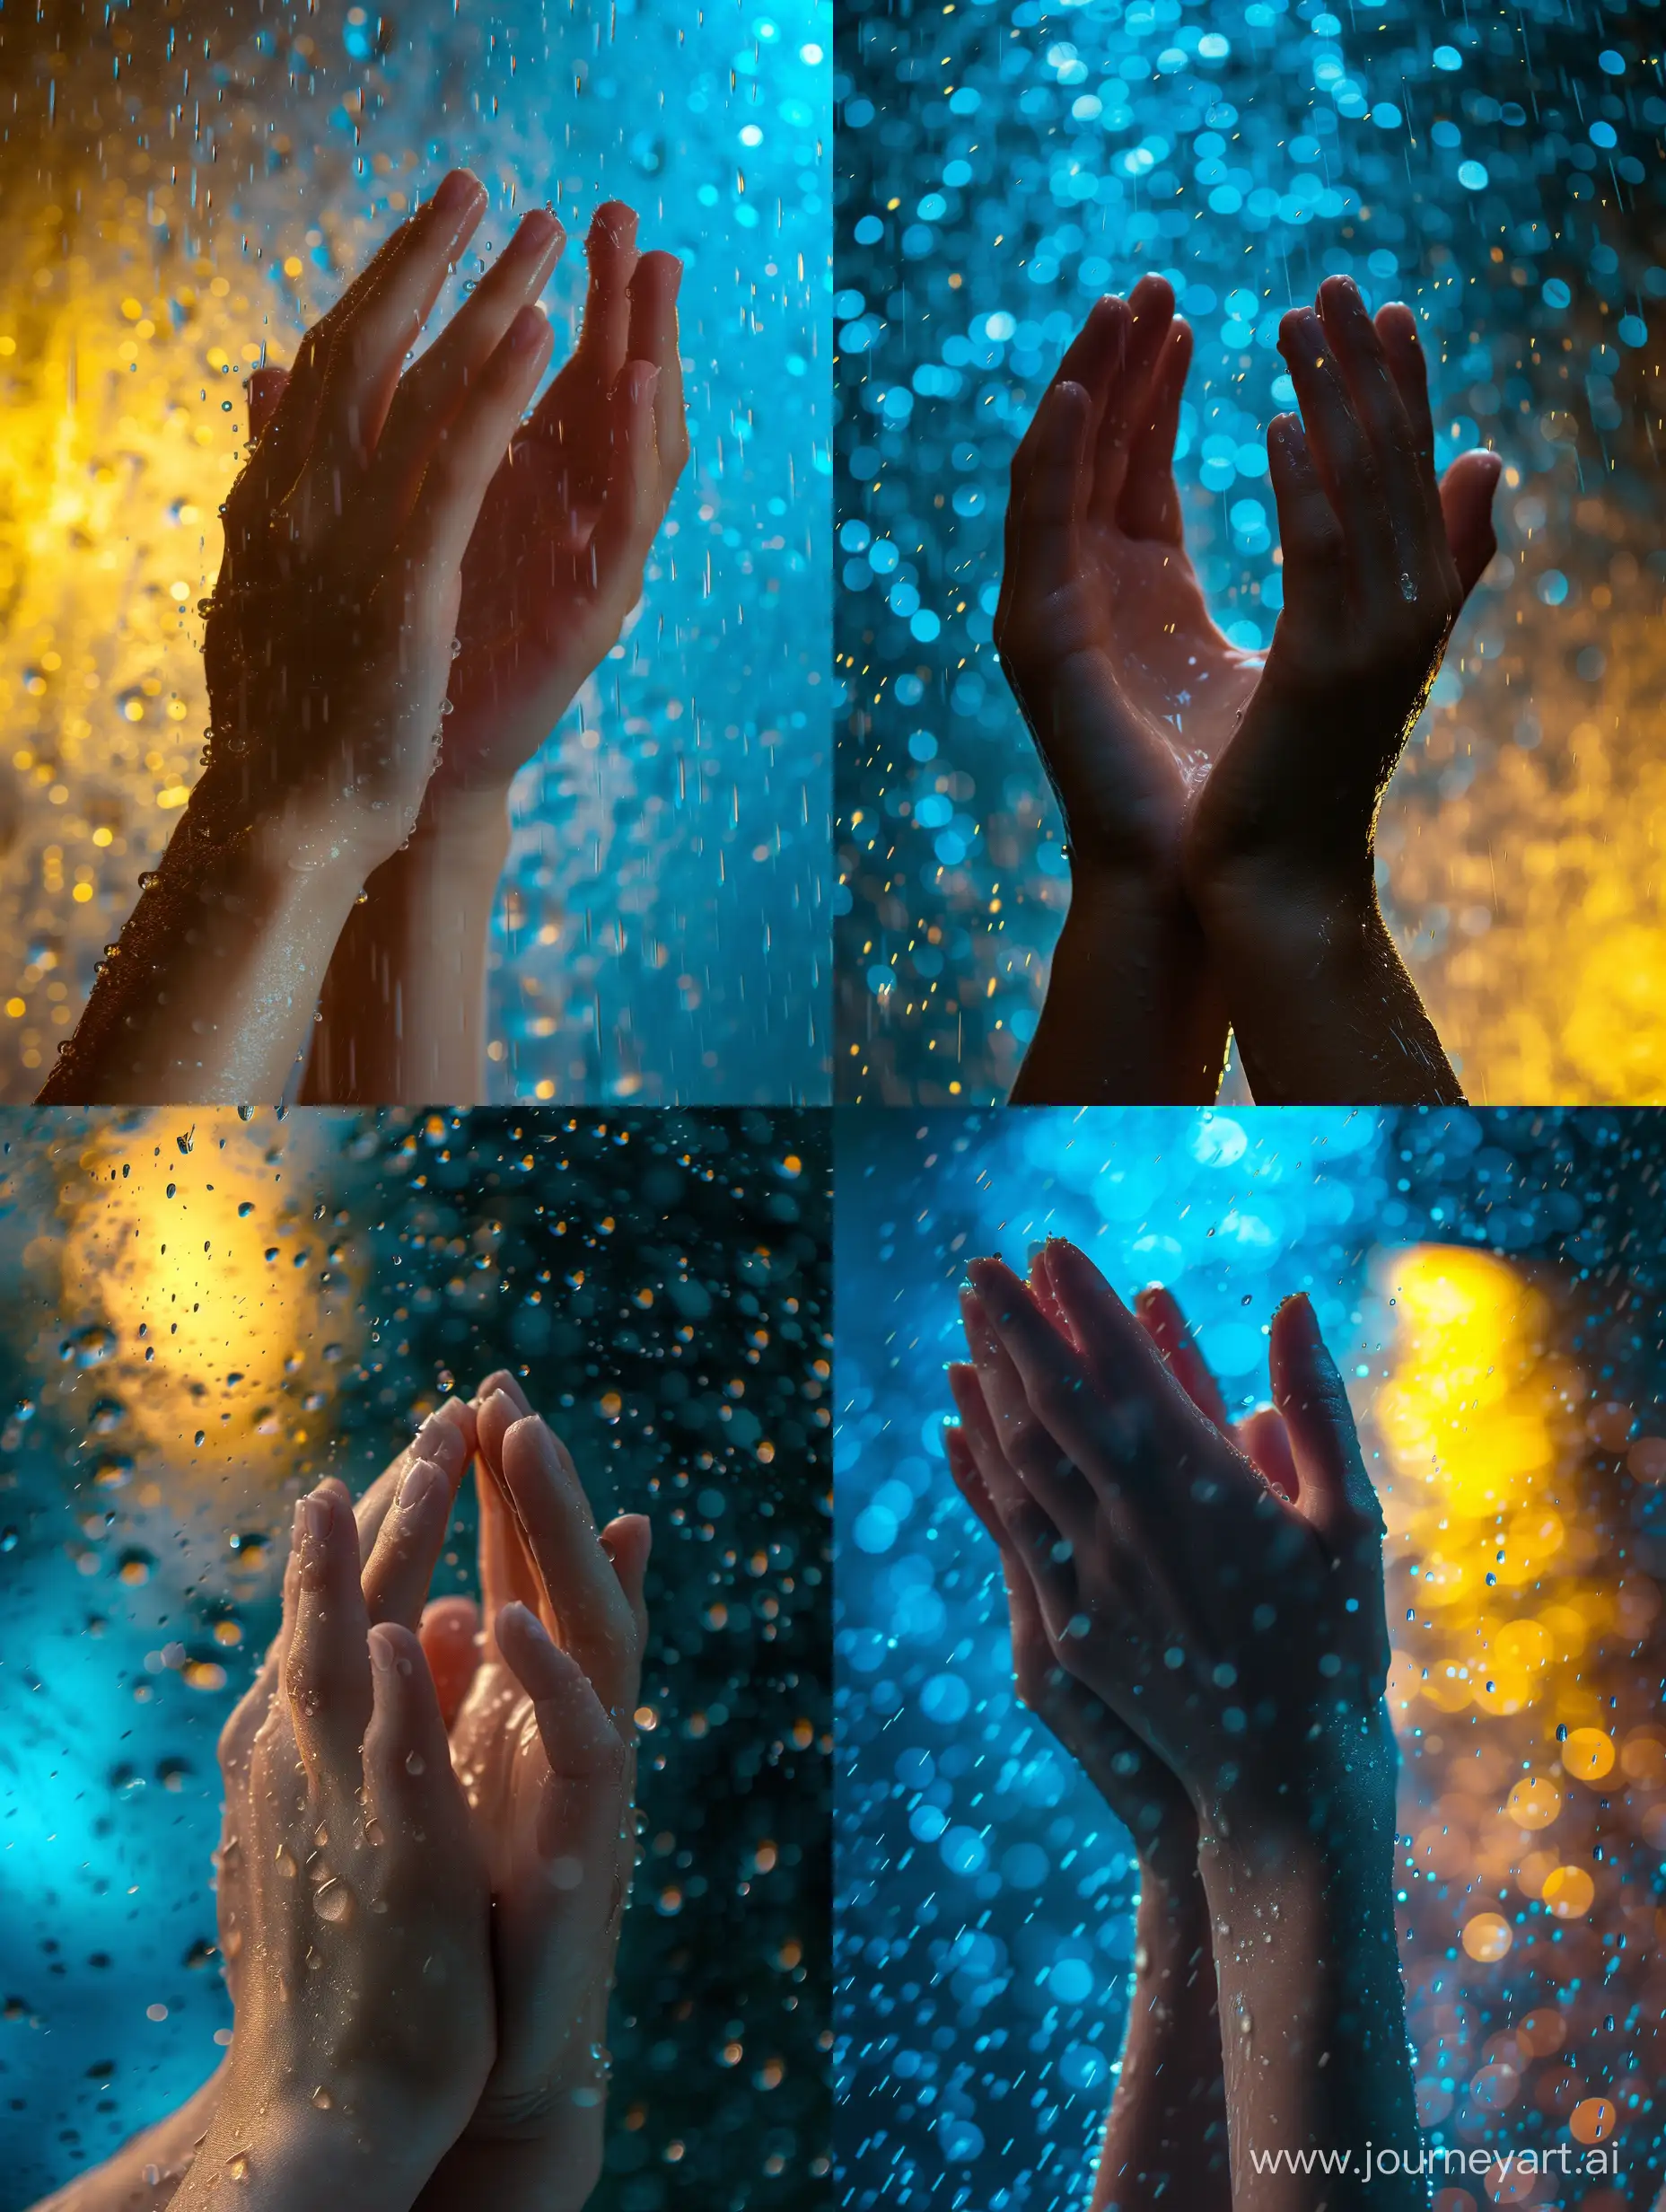 Serene-Hands-Clasped-in-Rain-Ultra-Realistic-CloseUp-with-Blue-and-Yellow-Lights